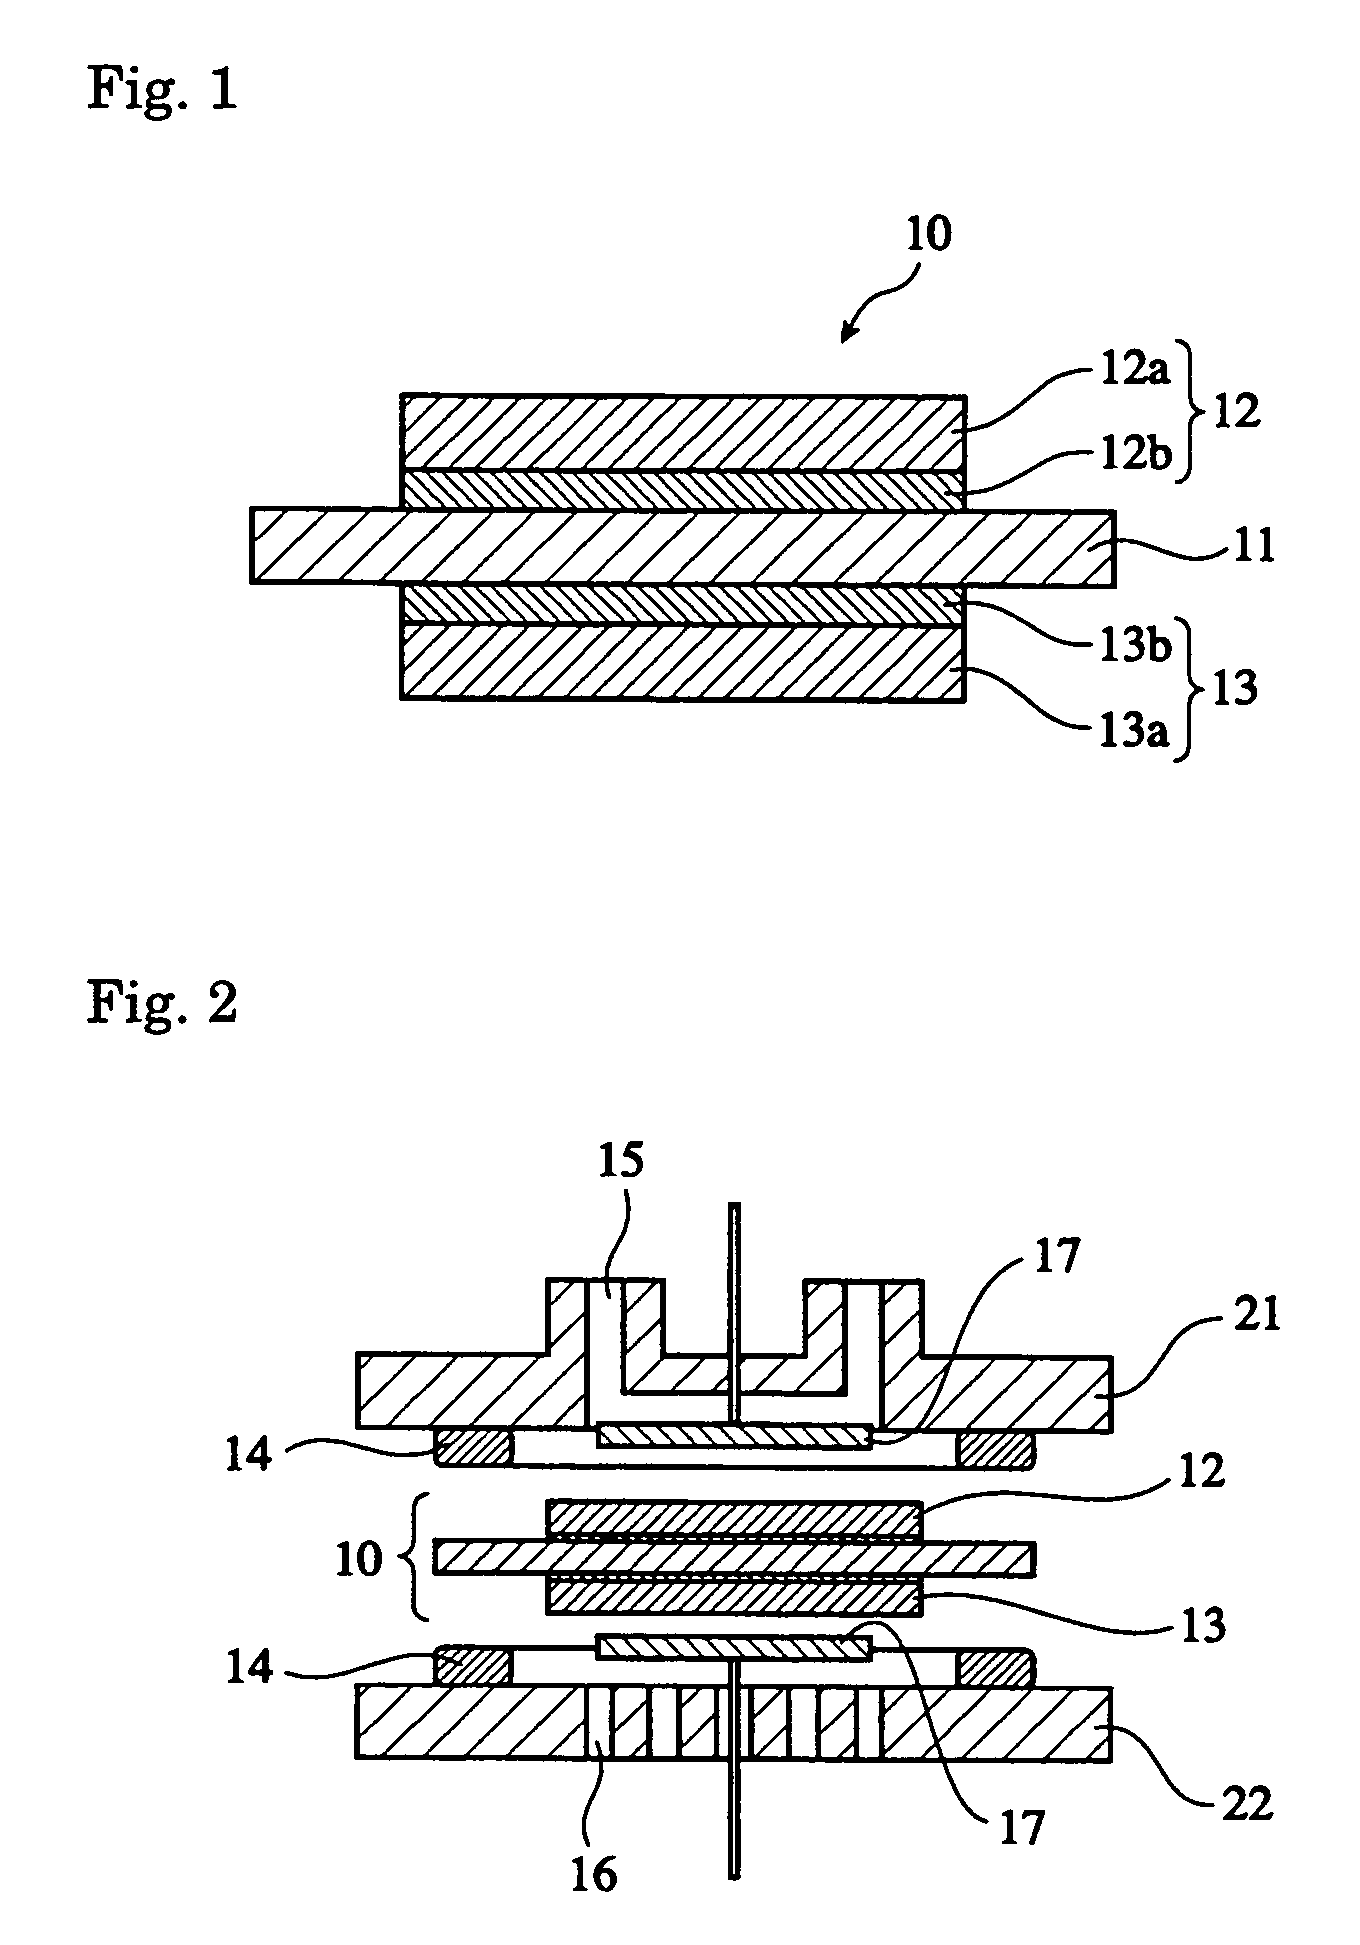 Silica sol composition, membrane electrode assembly with proton-exchange membrane, and fuel cell